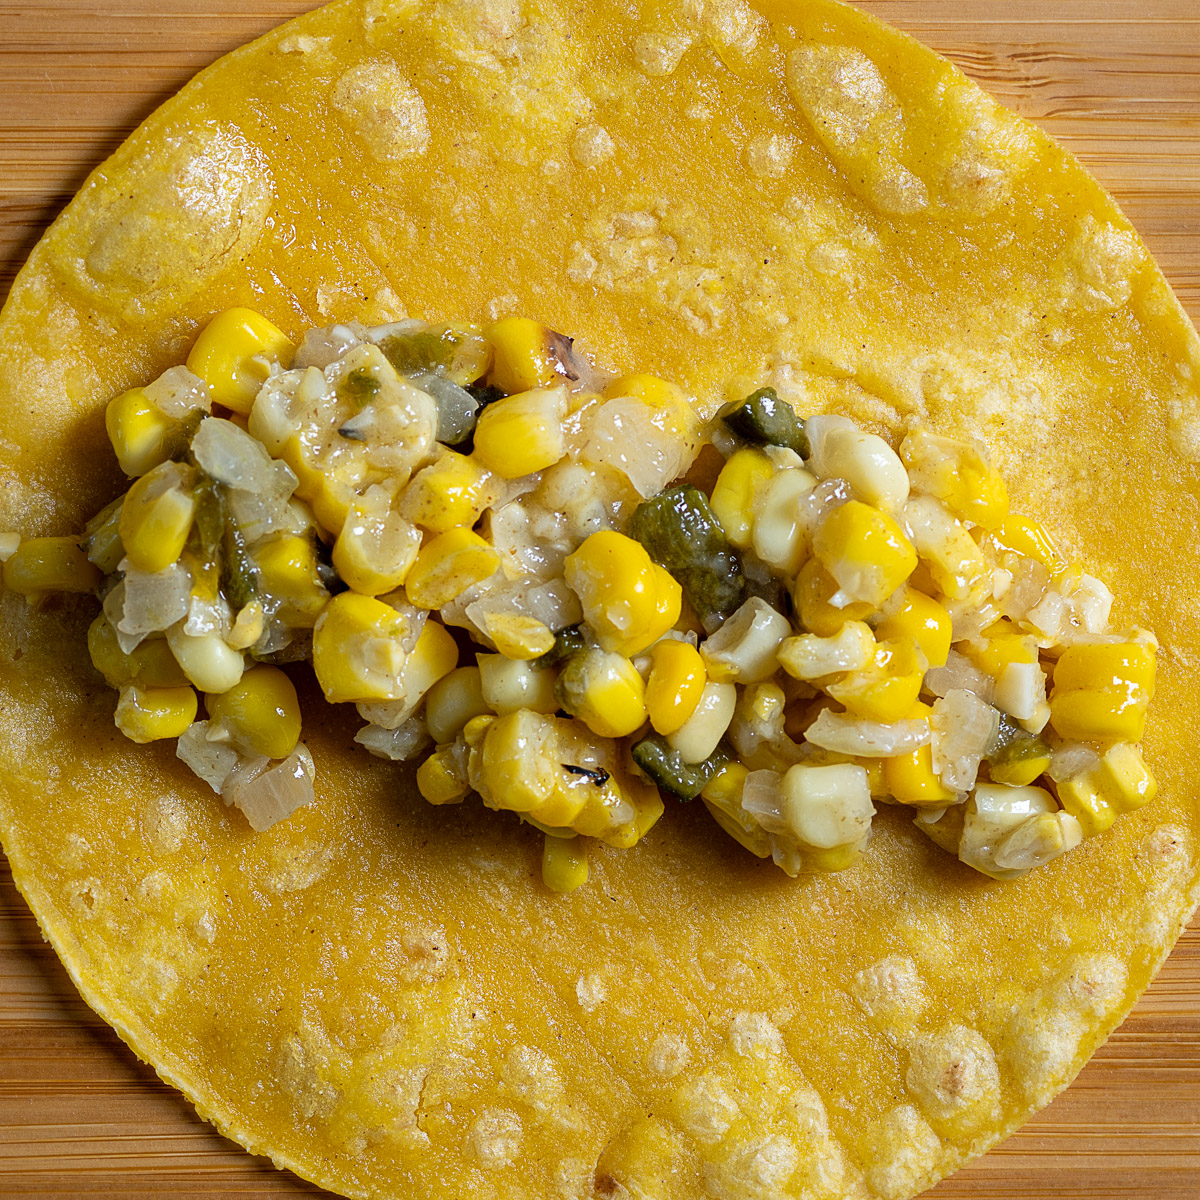 Place corn mixture in the center of a tortilla.